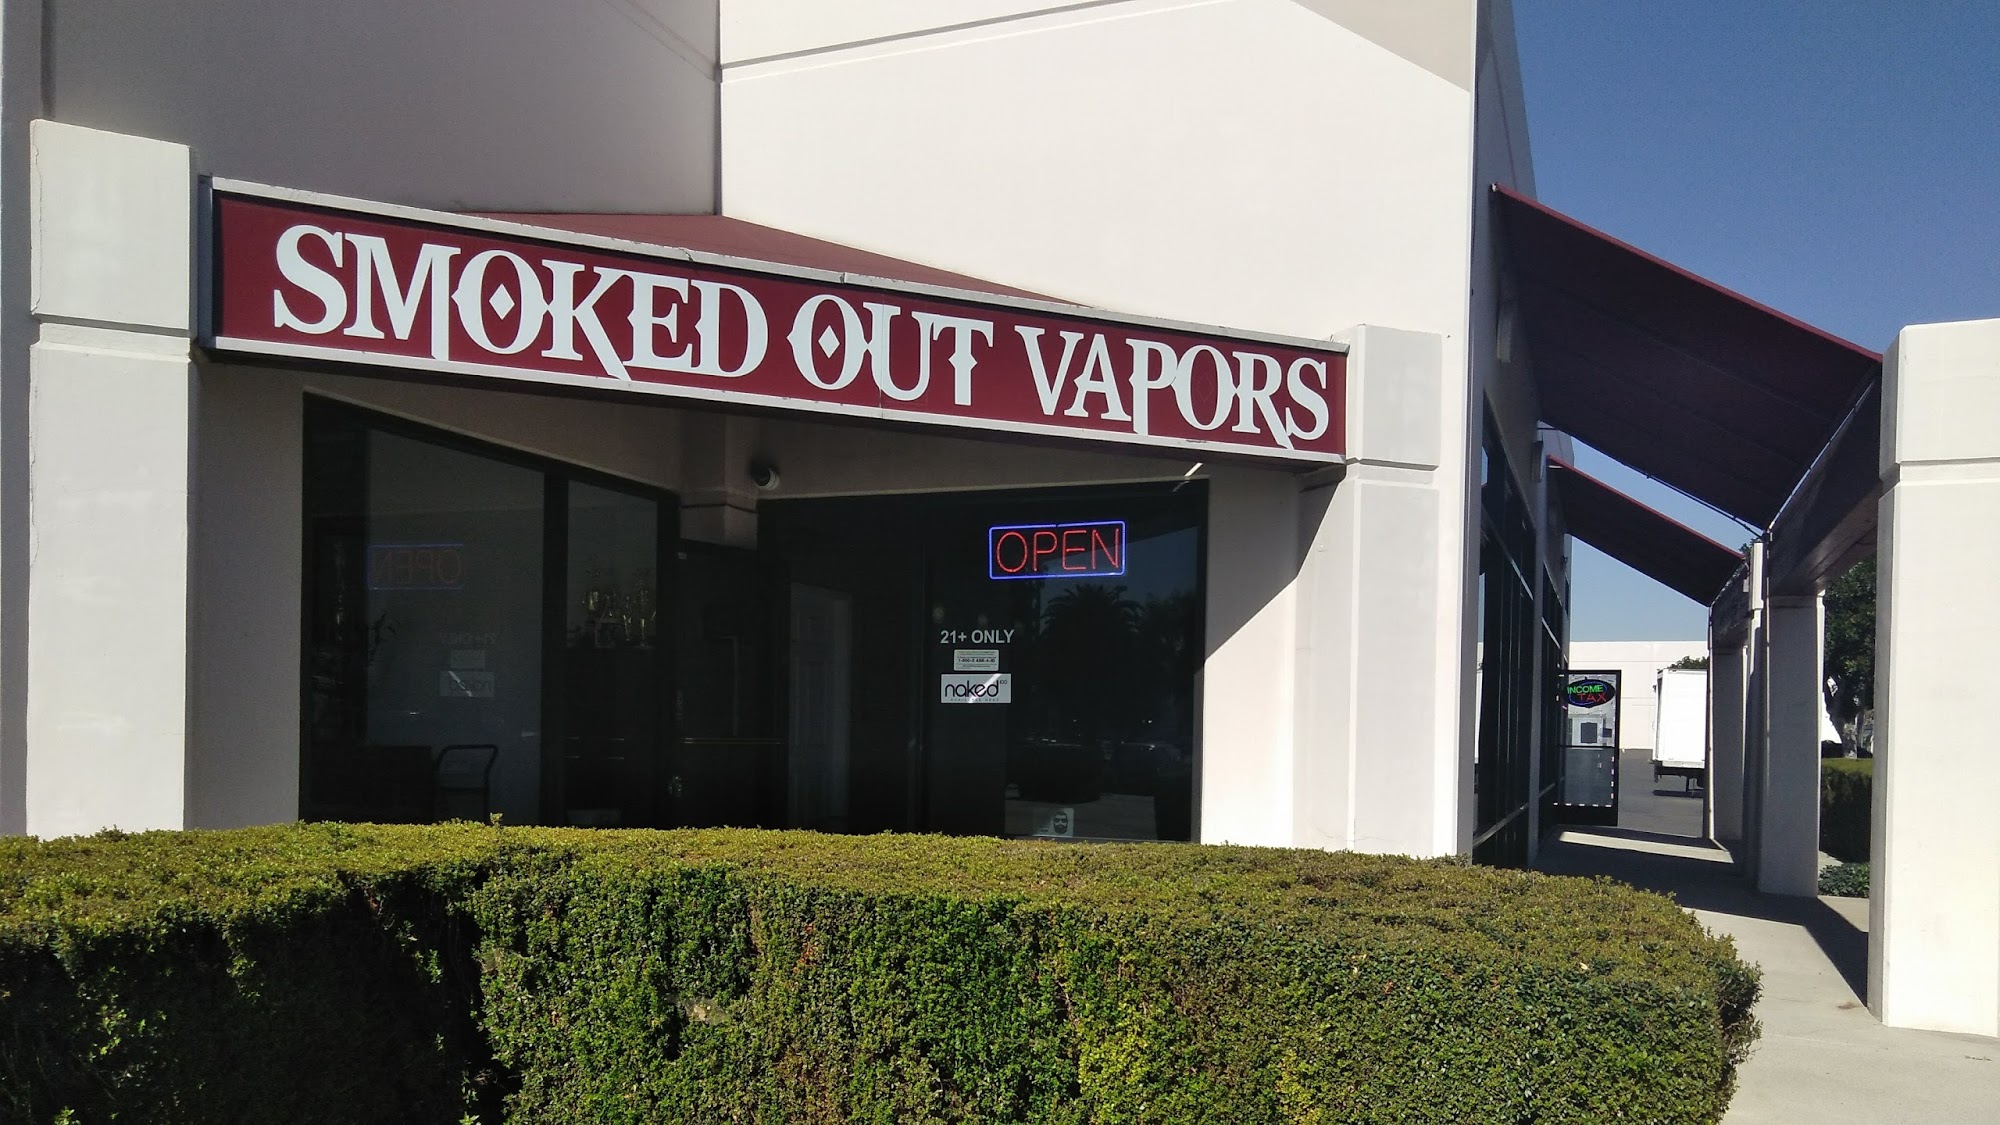 SMOKED OUT VAPORS